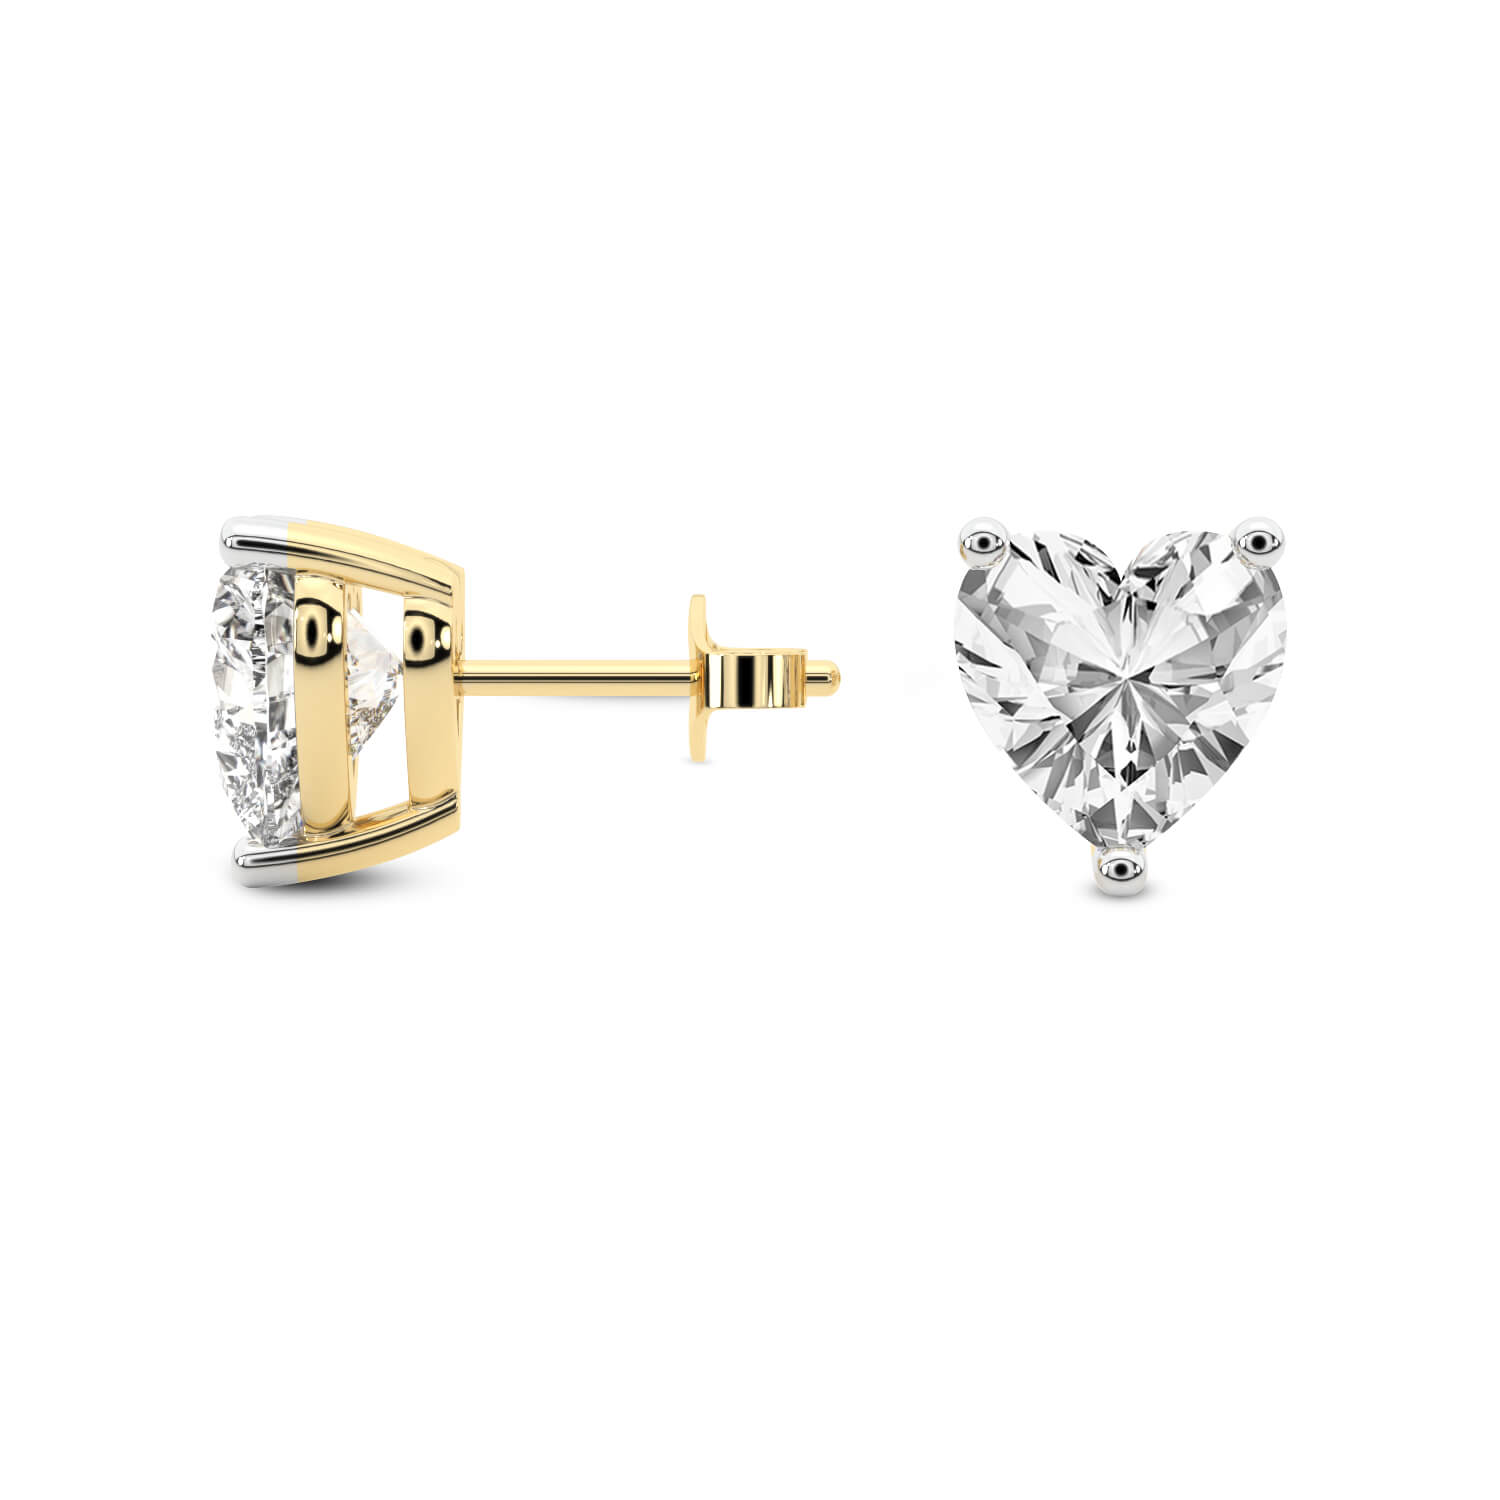 3 Prong Heart Lab Diamond Stud Earrings yellow gold earring, small left view